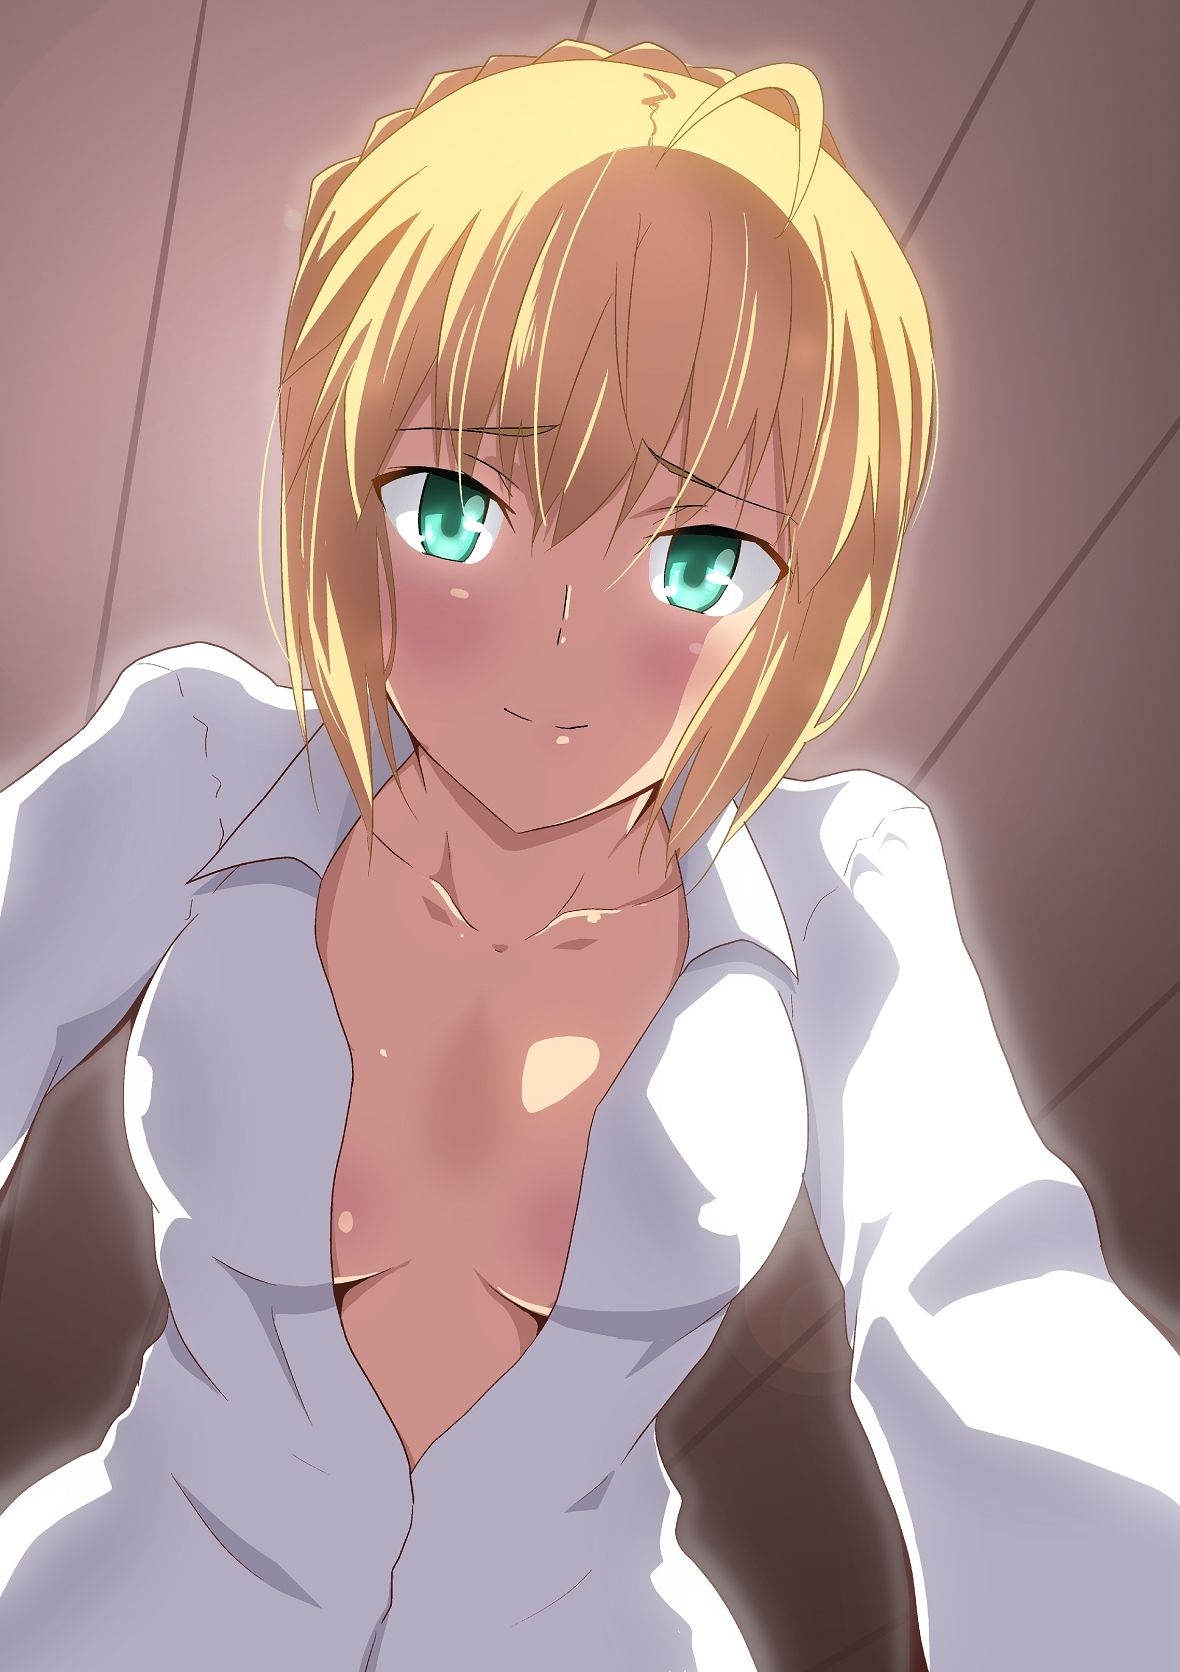 [Hara] Saber to Omake (Fate/stay night) 8